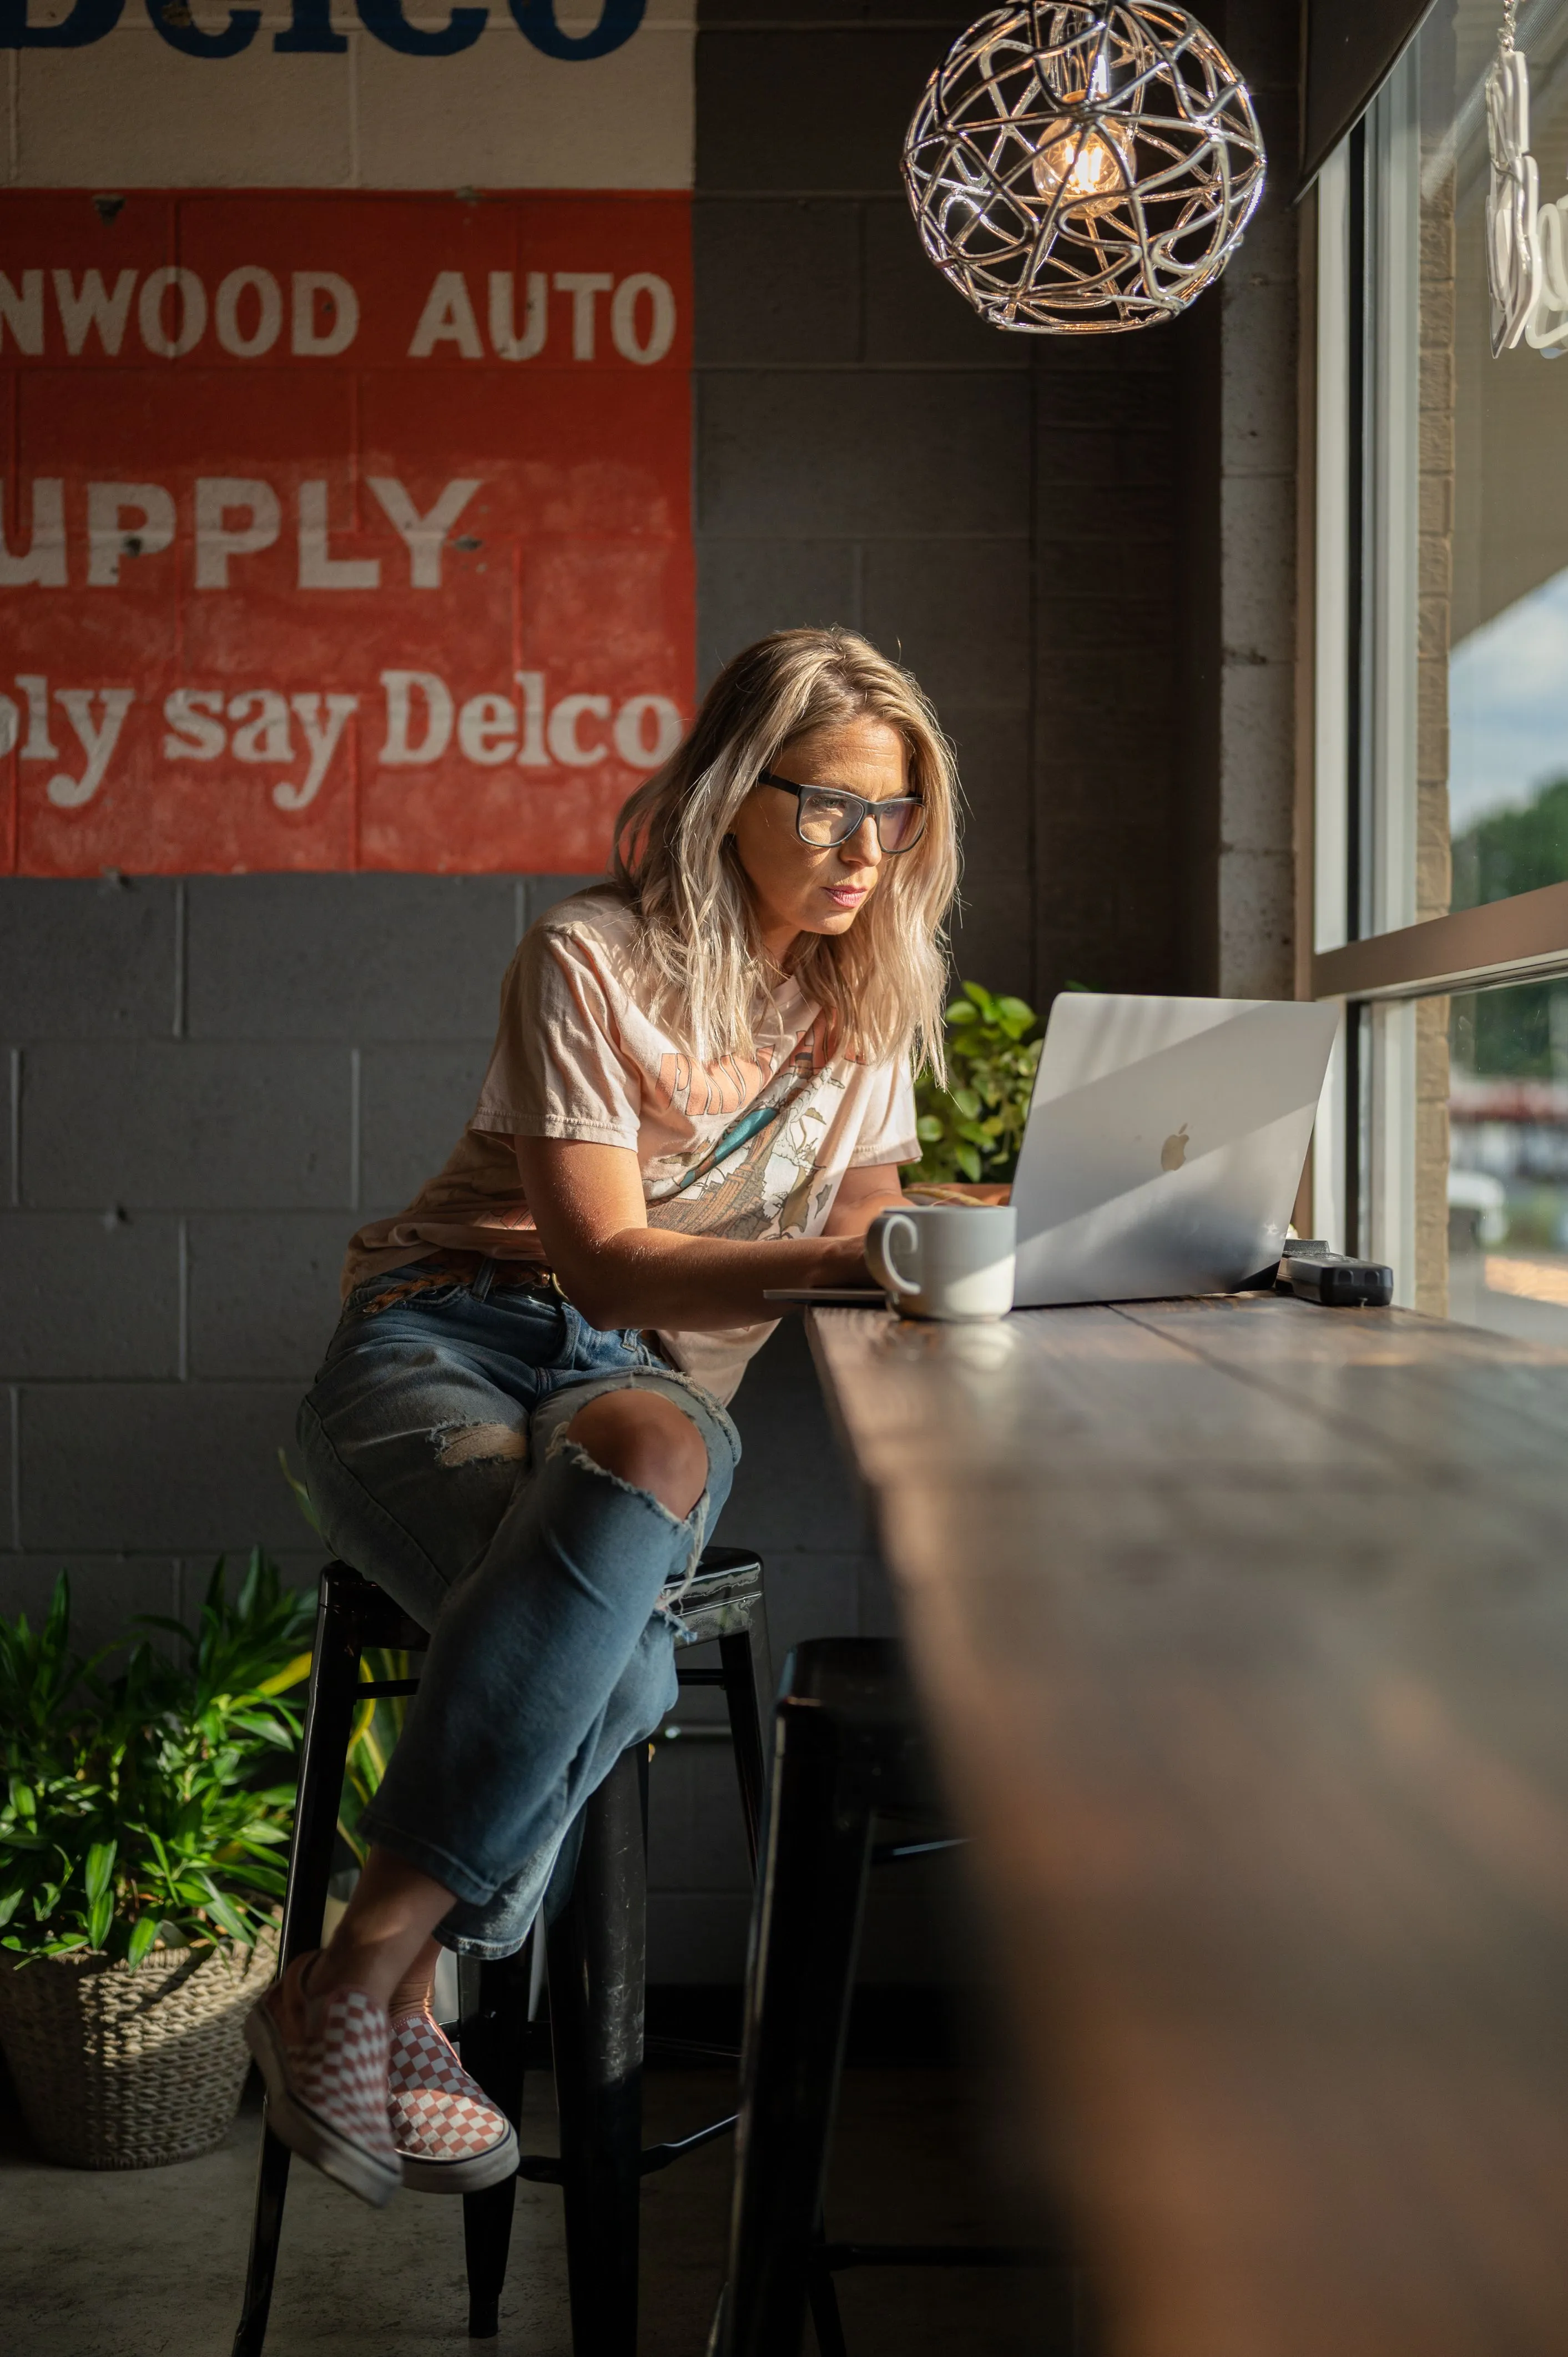 Woman sitting at a cafe table working on a laptop with a coffee cup, an industrial-style pendant light above and a vintage auto supply sign in the background.